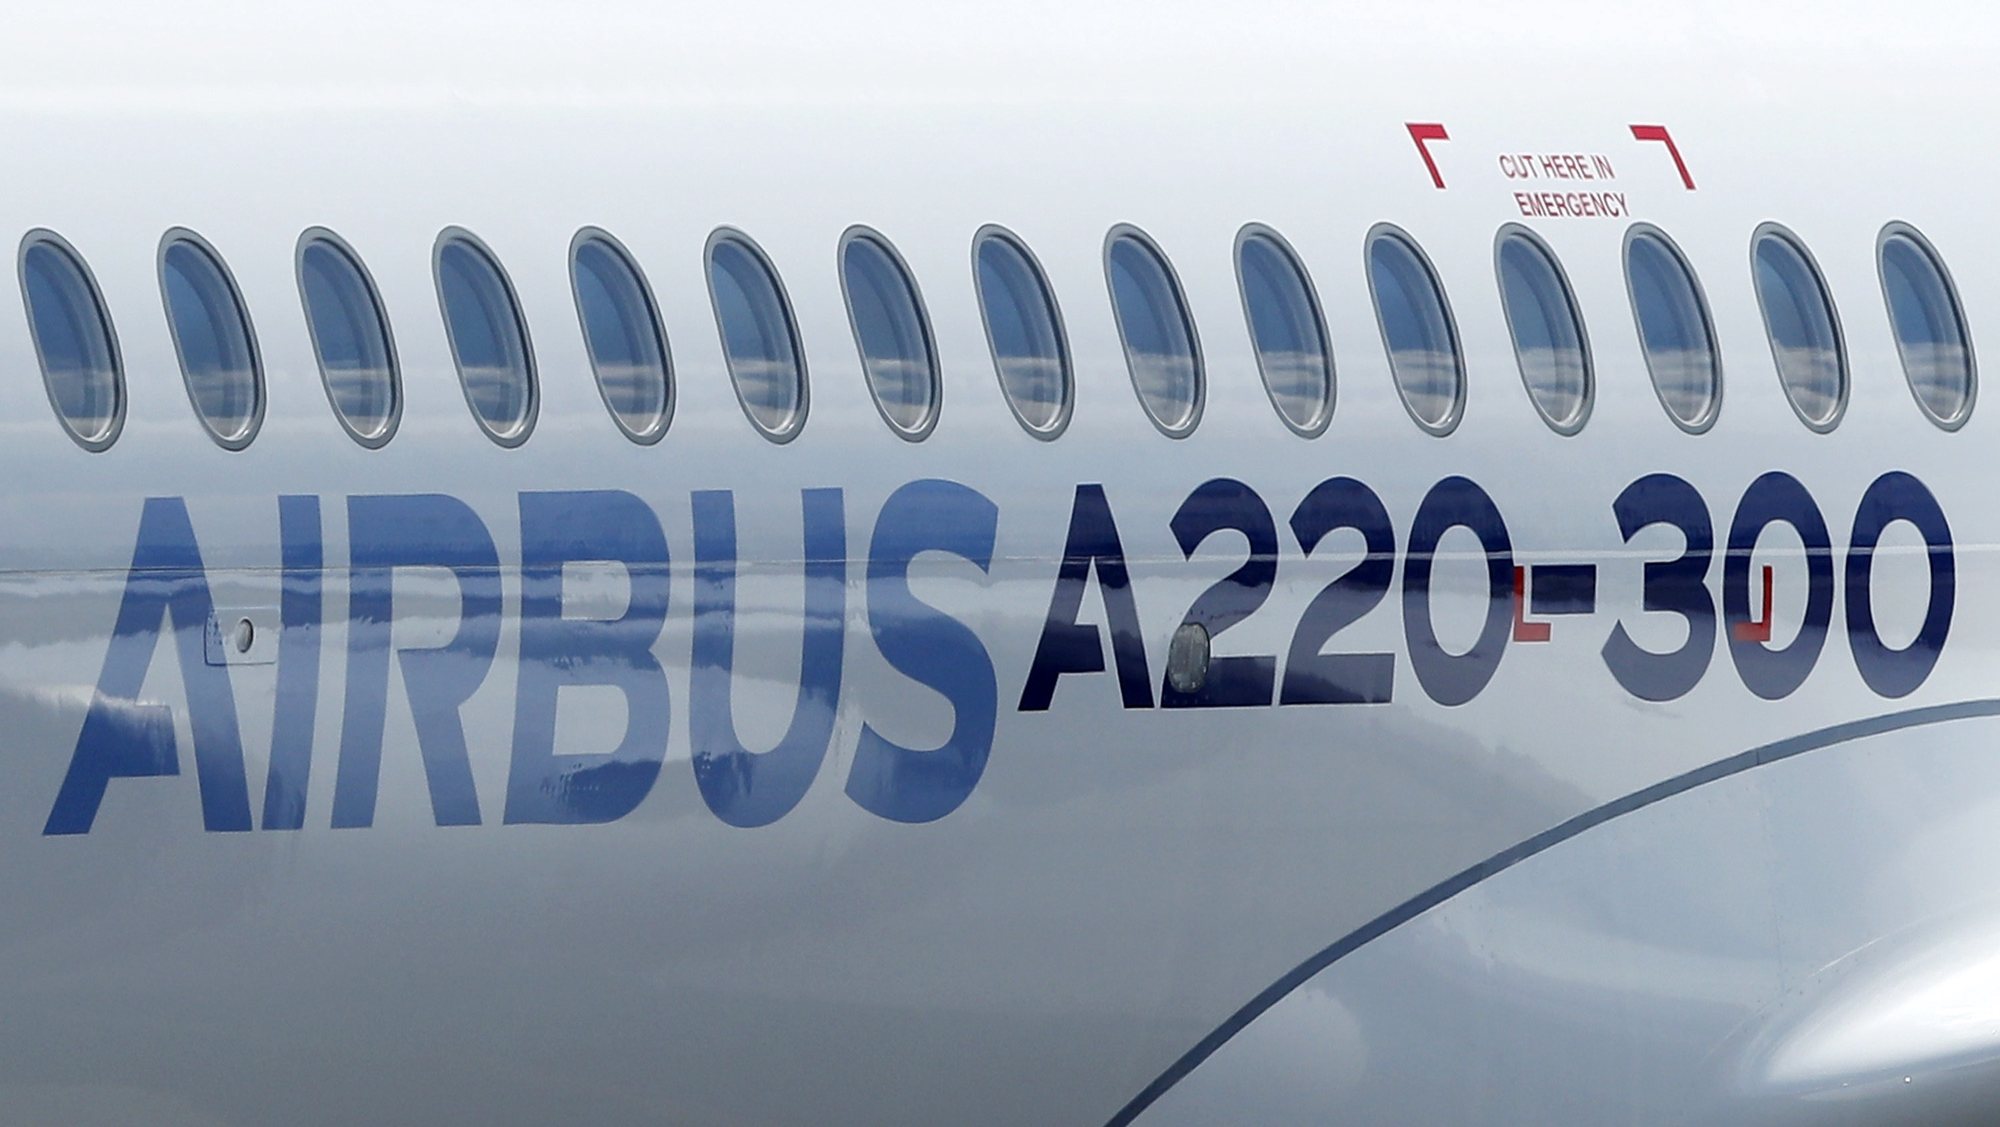 epa06877729 A new Airbus A220-300 aircraft during the presentation of the new Airbus A220-300 Single-Aisle aircraft at the Airbus&#039;s delivery center in Colomiers, near Toulouse, France, 10 July 2018. After taking the control of Bombardier aircraft manufacturer on June 2018, the CSeries program CS 100 and CS 300 becomes the new Airbus A220-300 Single-Aisle aircraft.  EPA/GUILLAUME HORCAJUELO